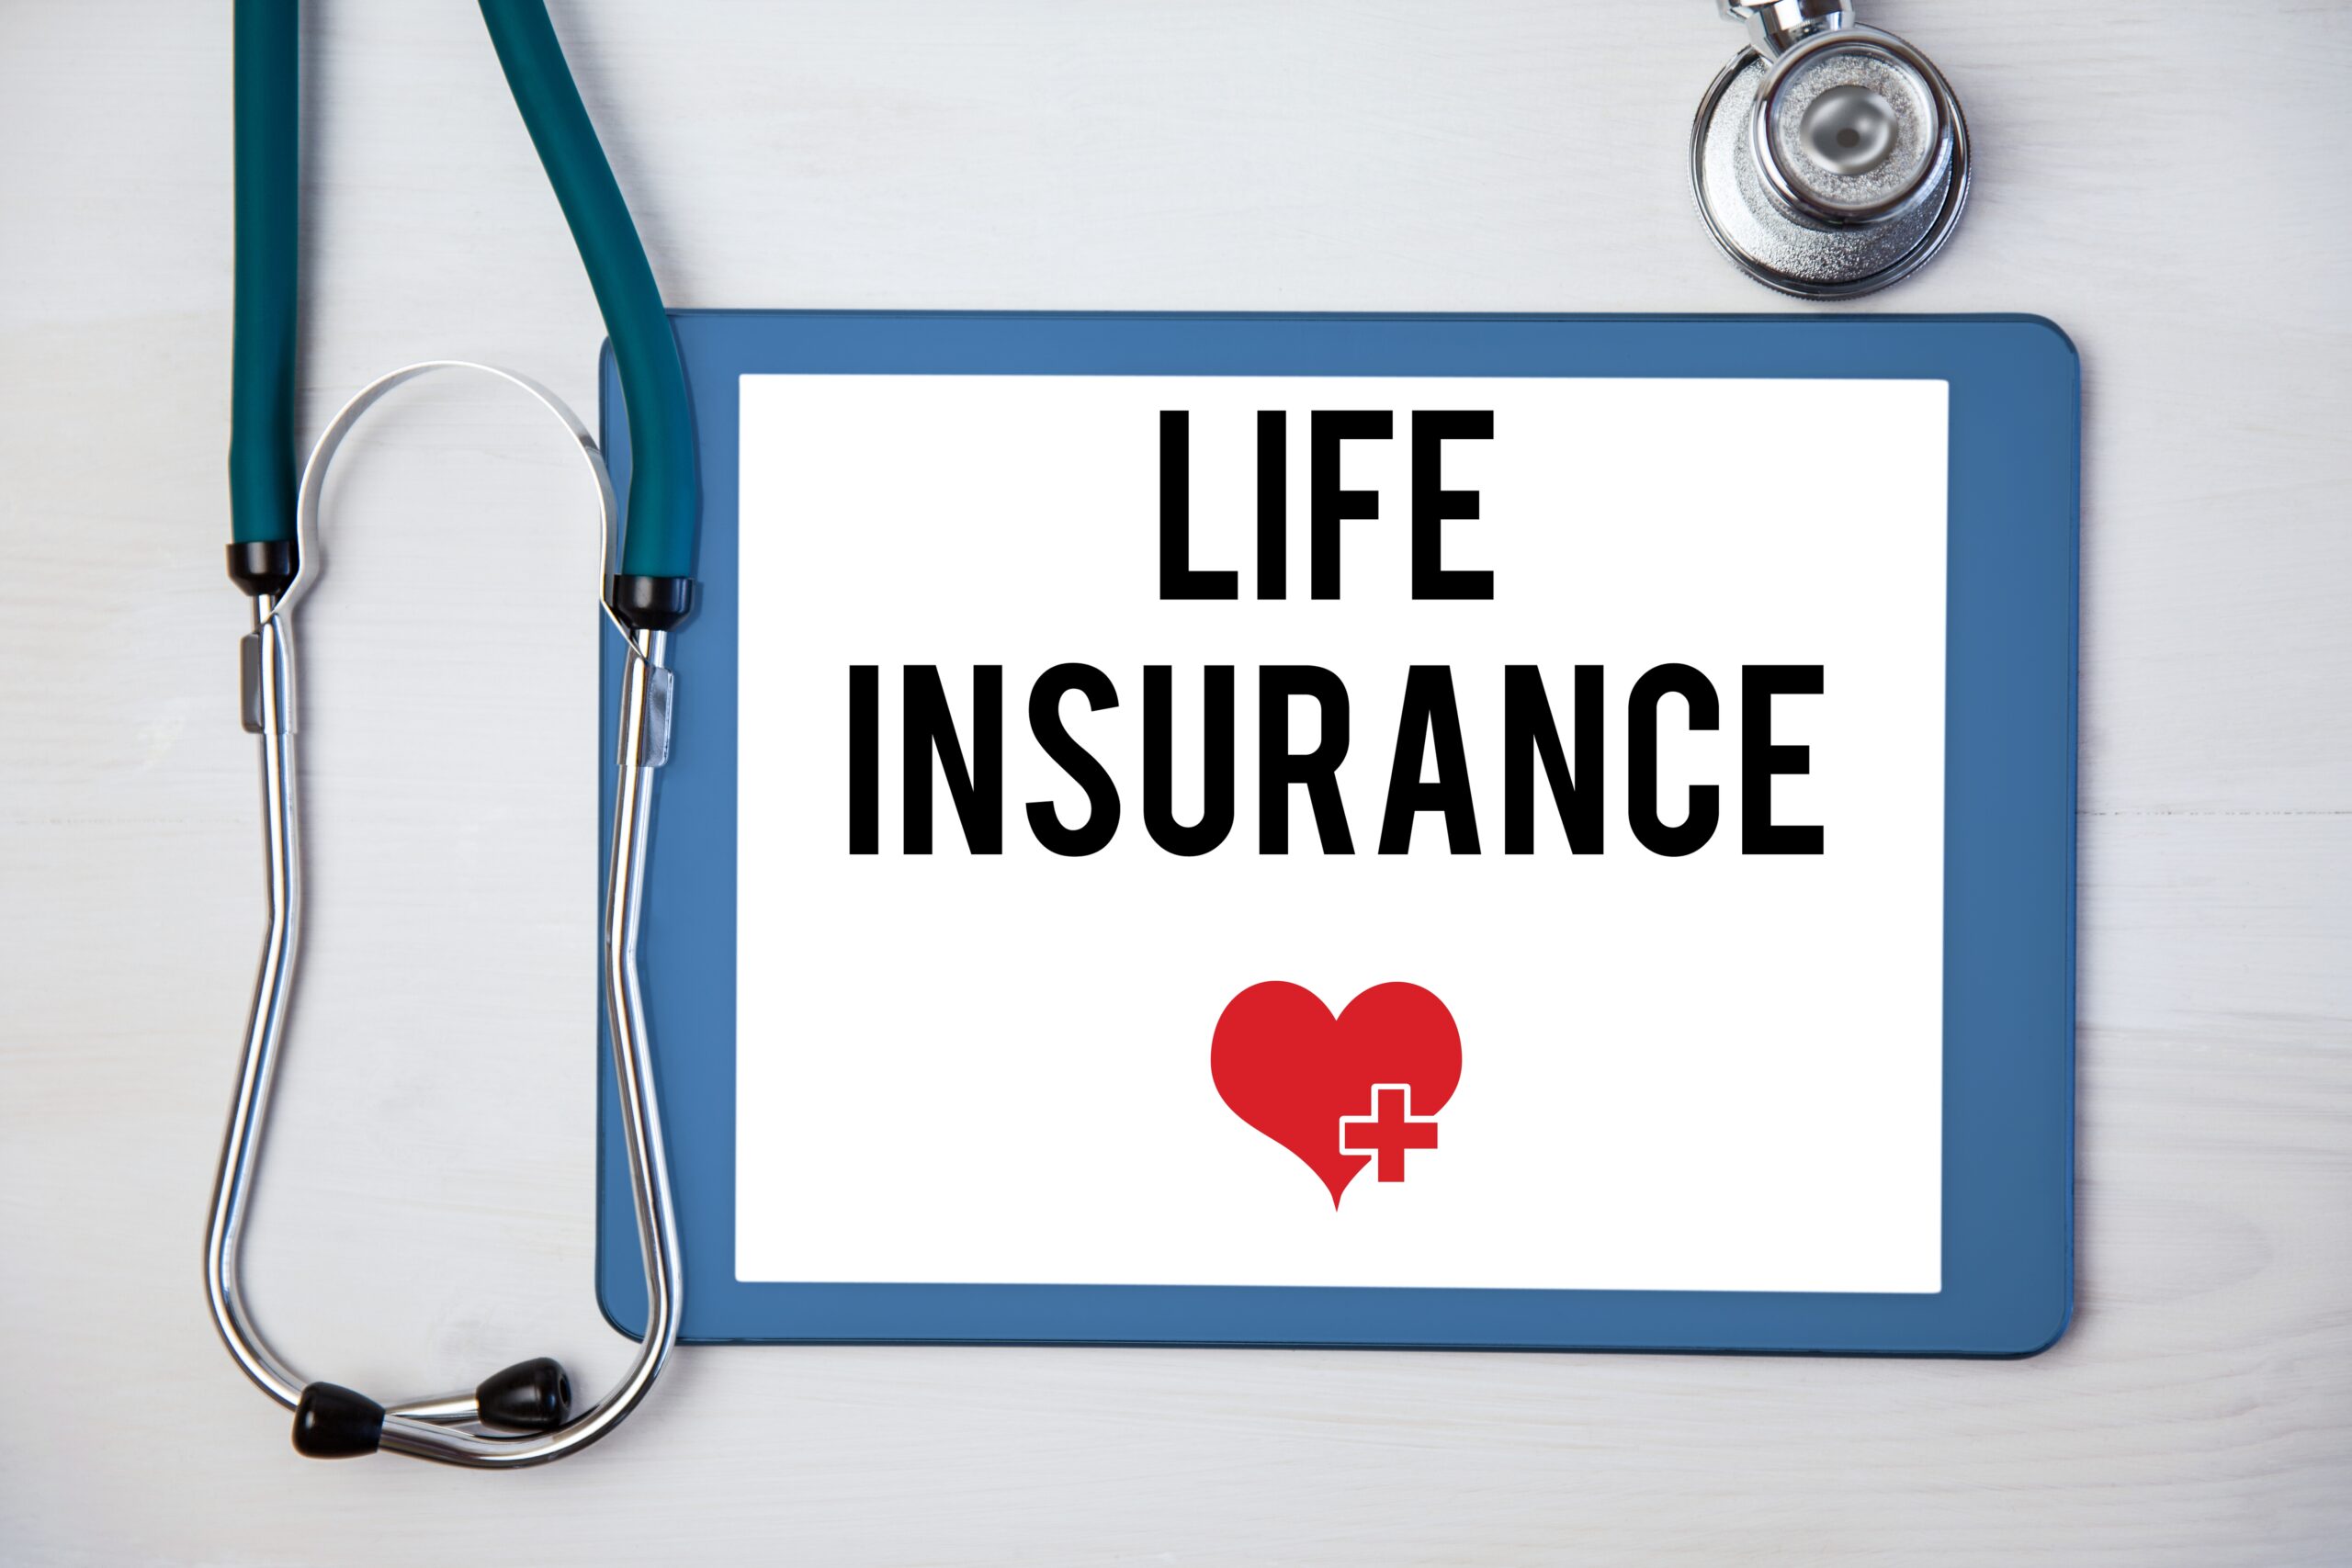 Medco Containment Life Insurance Company Medicare Supplement Review